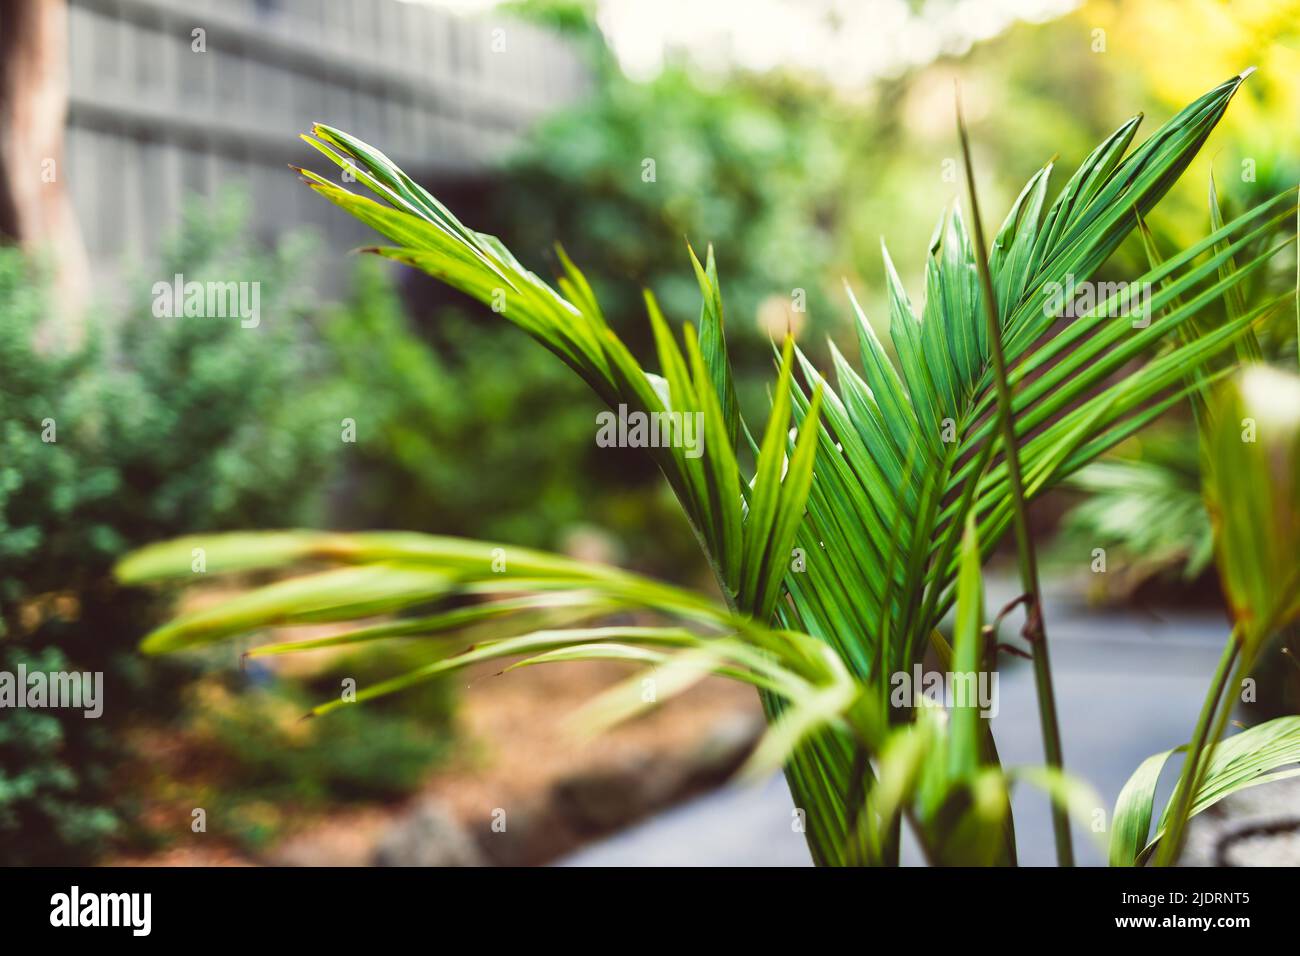 palm tree surrounded by idyllic sunny backyard with lots of tropical Australian native plants shot at shallow depth of field Stock Photo